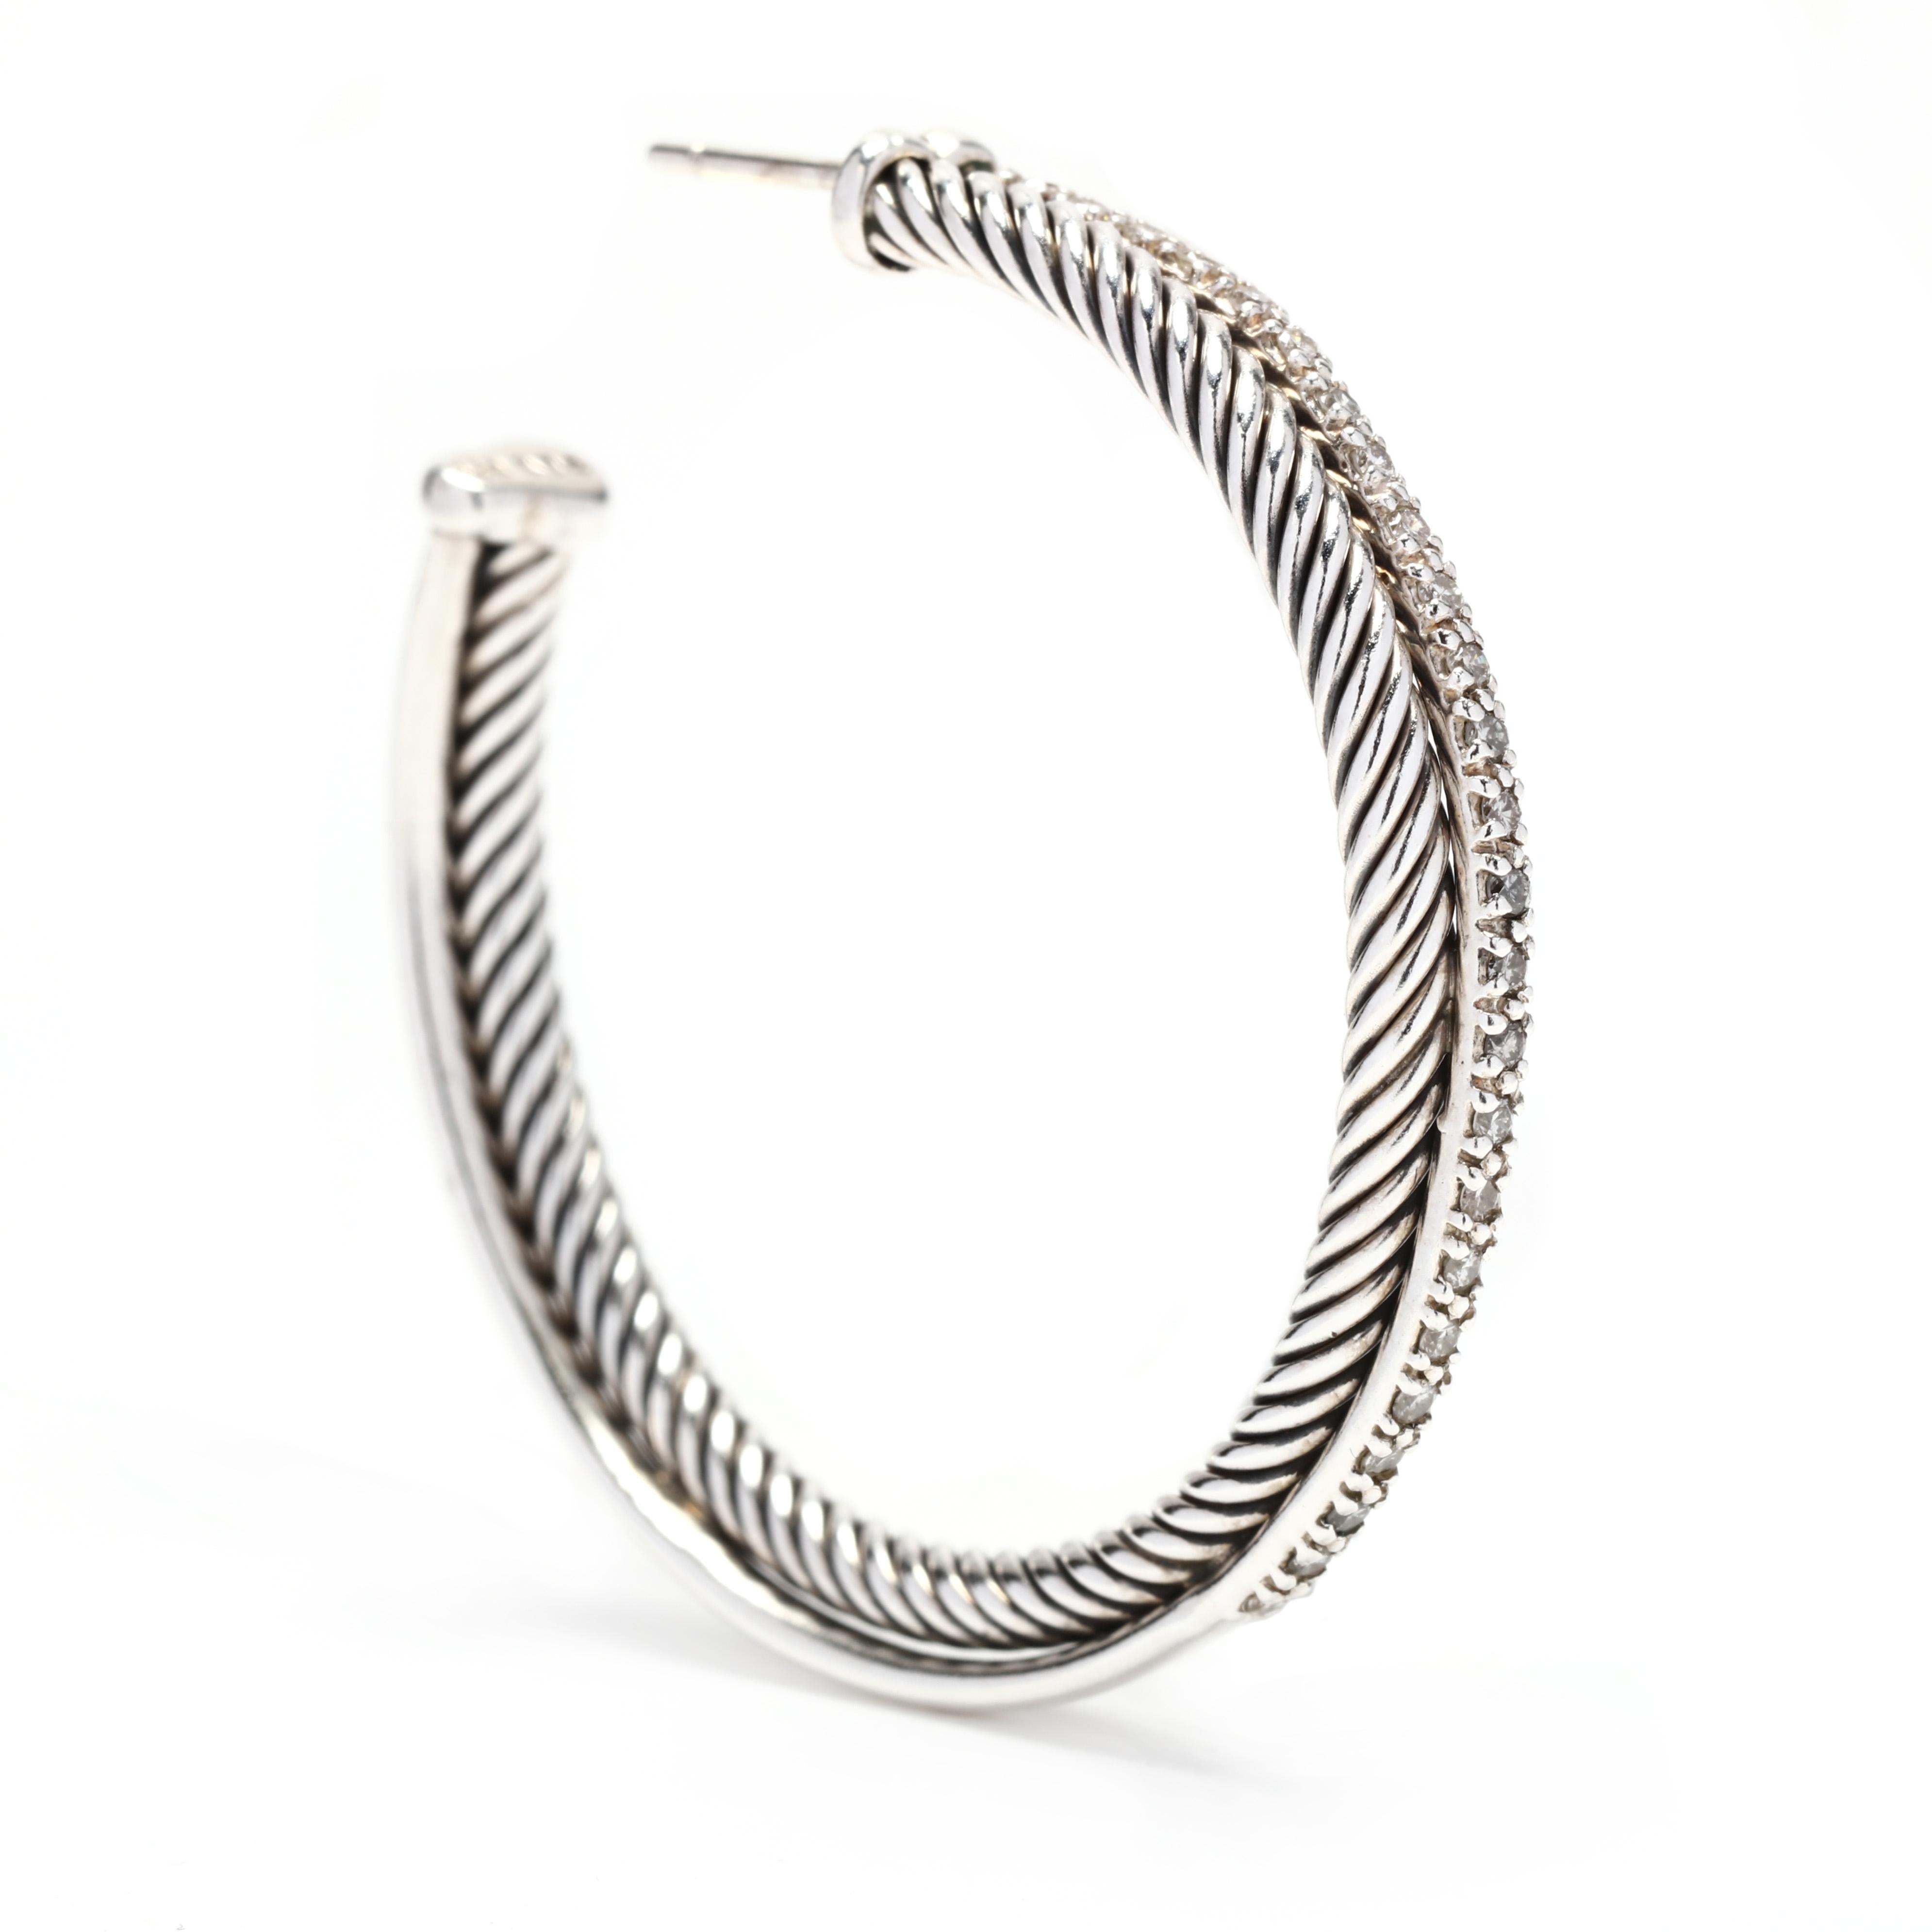 A pair of David Yurman sterling silver diamond x-large crossover hoop earrings. These earrings feature a cable motif hoop with a diamond set crossover weighing approximately .53 total carats and with post and push backs.



Stones:

- diamonds, 50